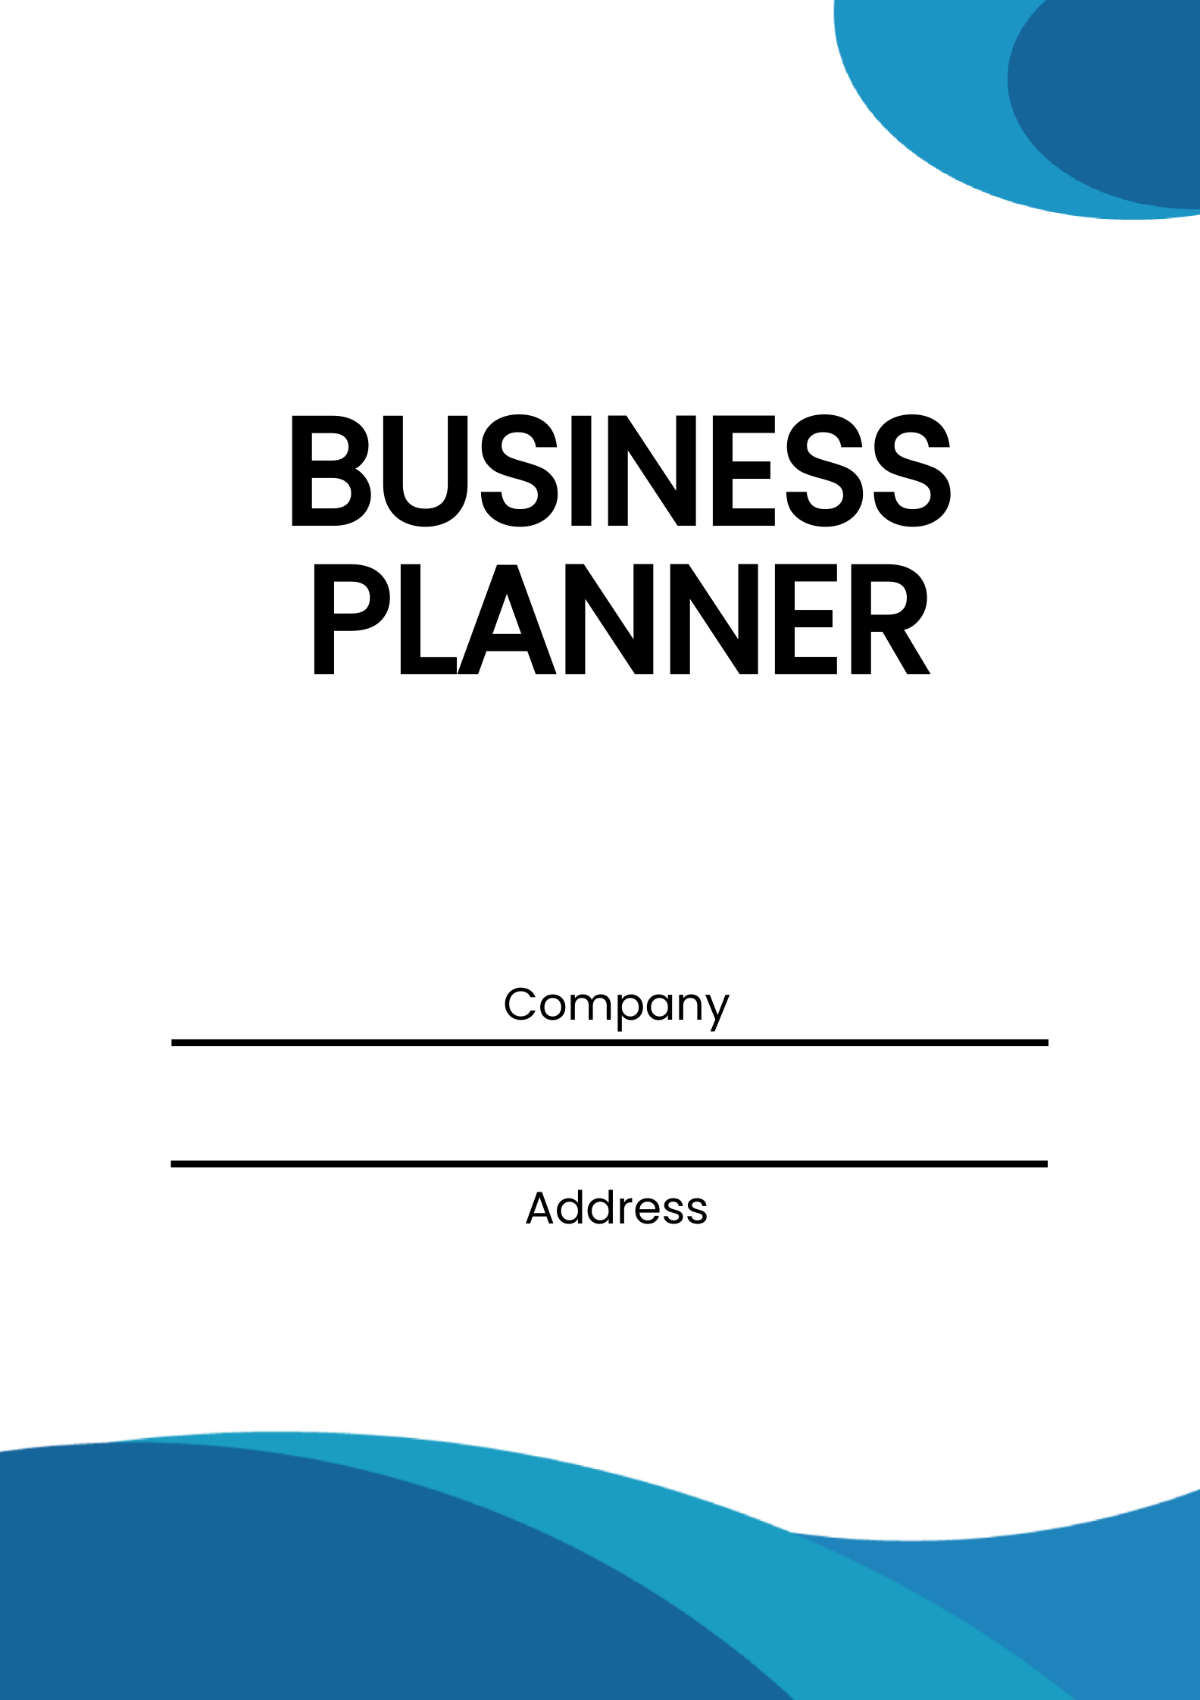 Creative Business Planner Template